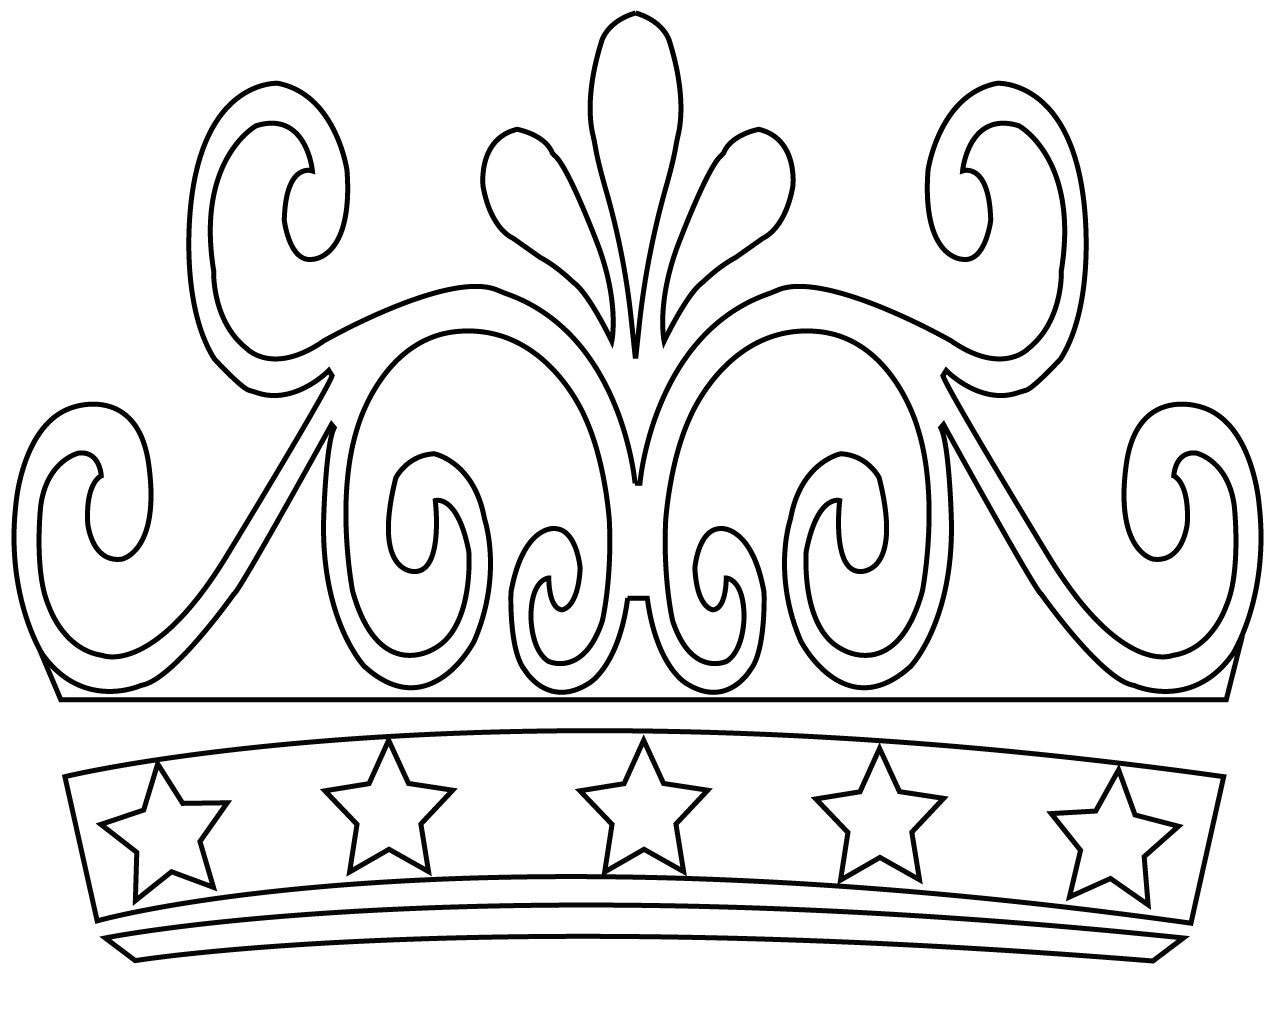 princess-crowns-coloring-pages-princess-crown-with-five-stars-of-gold